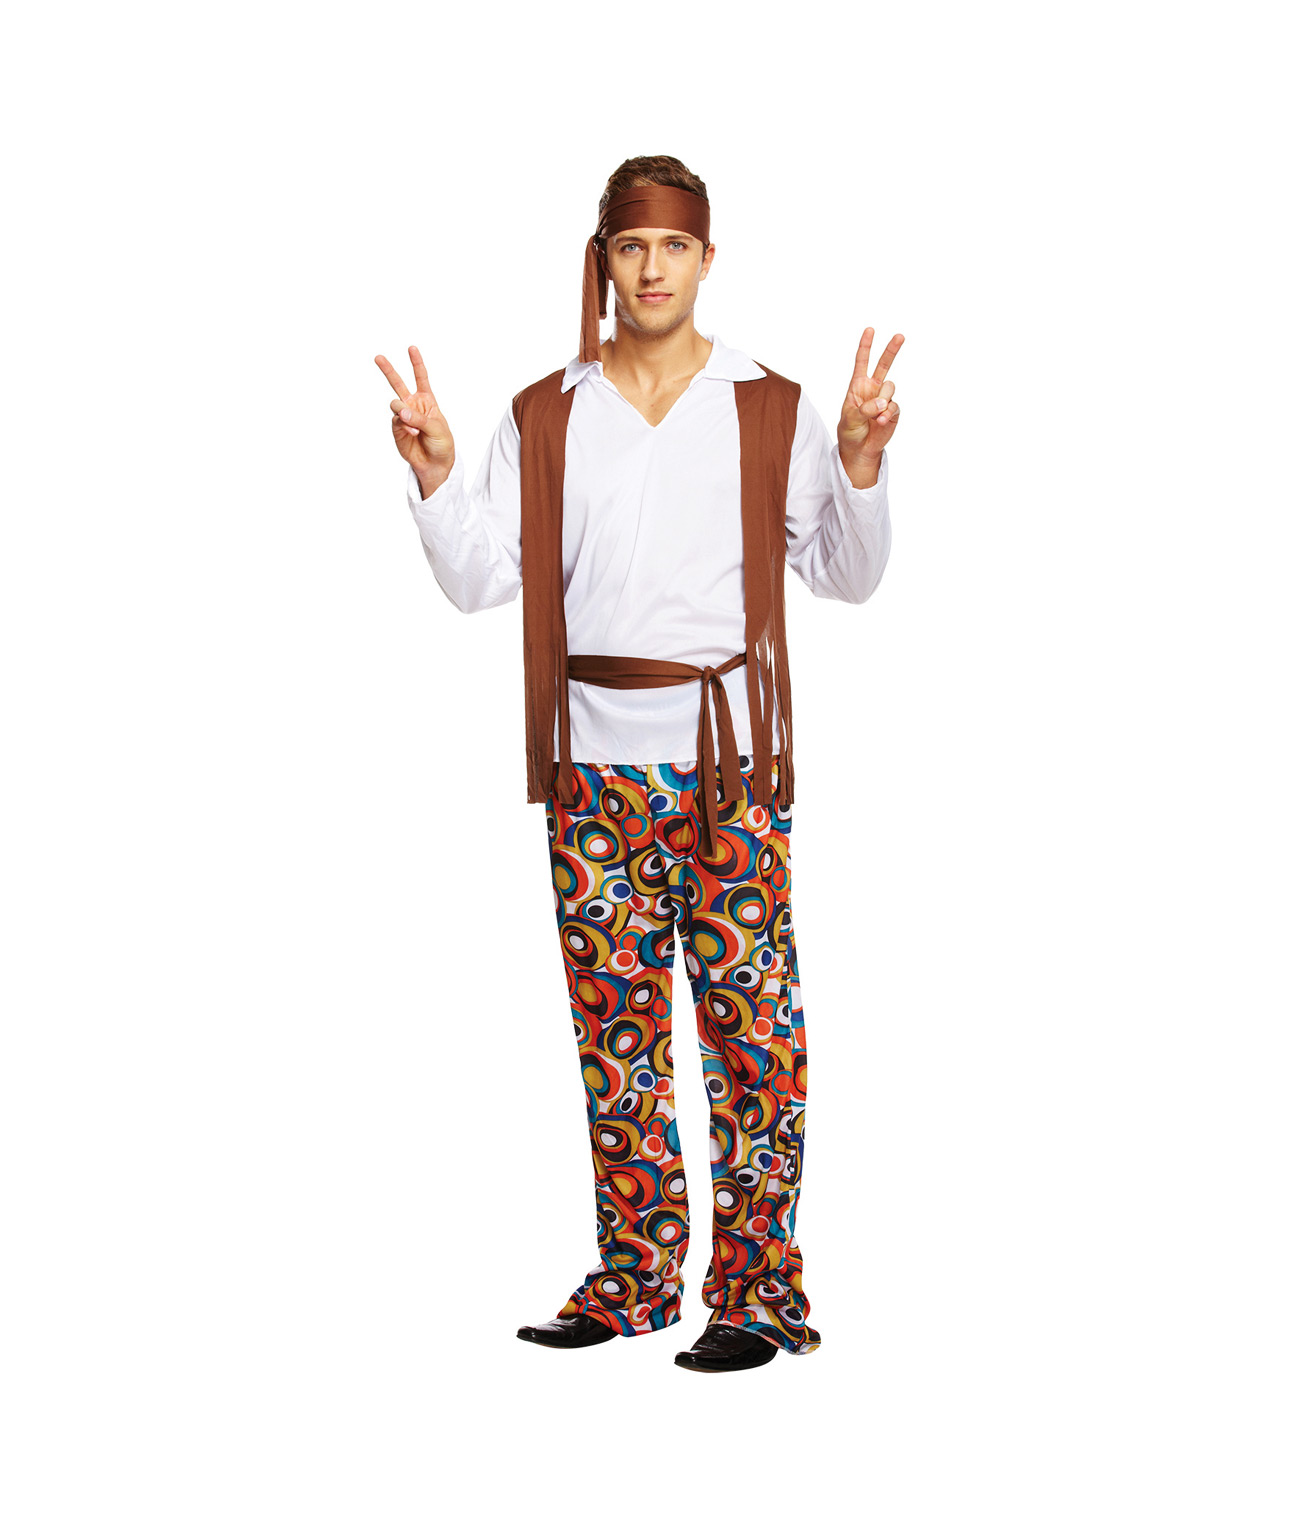 Adult Psychedelic Hippie Man Fancy Dress Party Costume